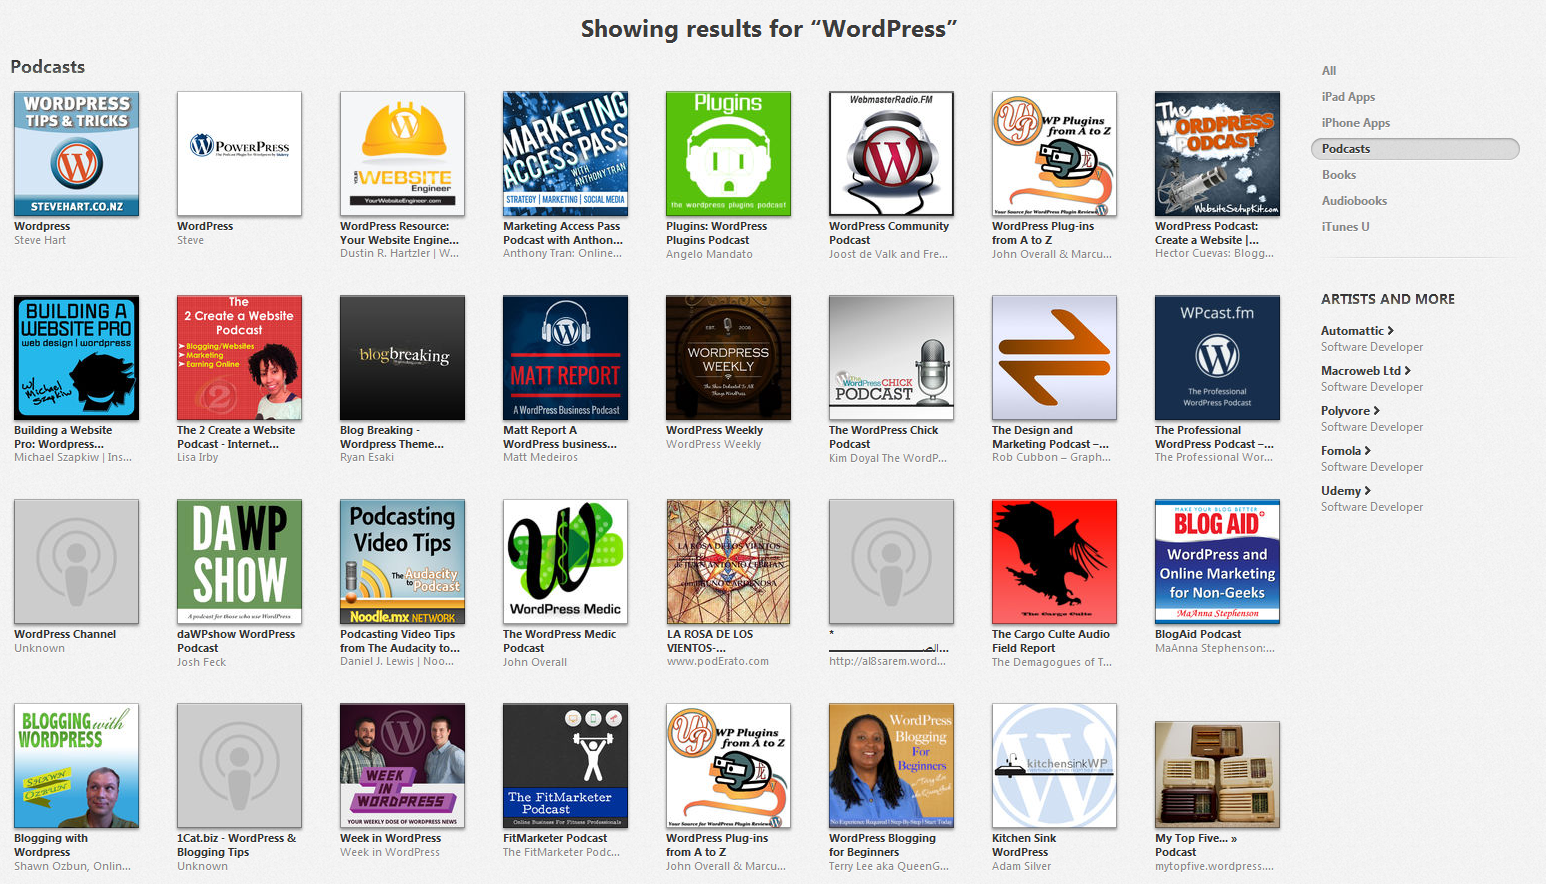 Variety of WordPress Podcasts To Listen To On iTunes